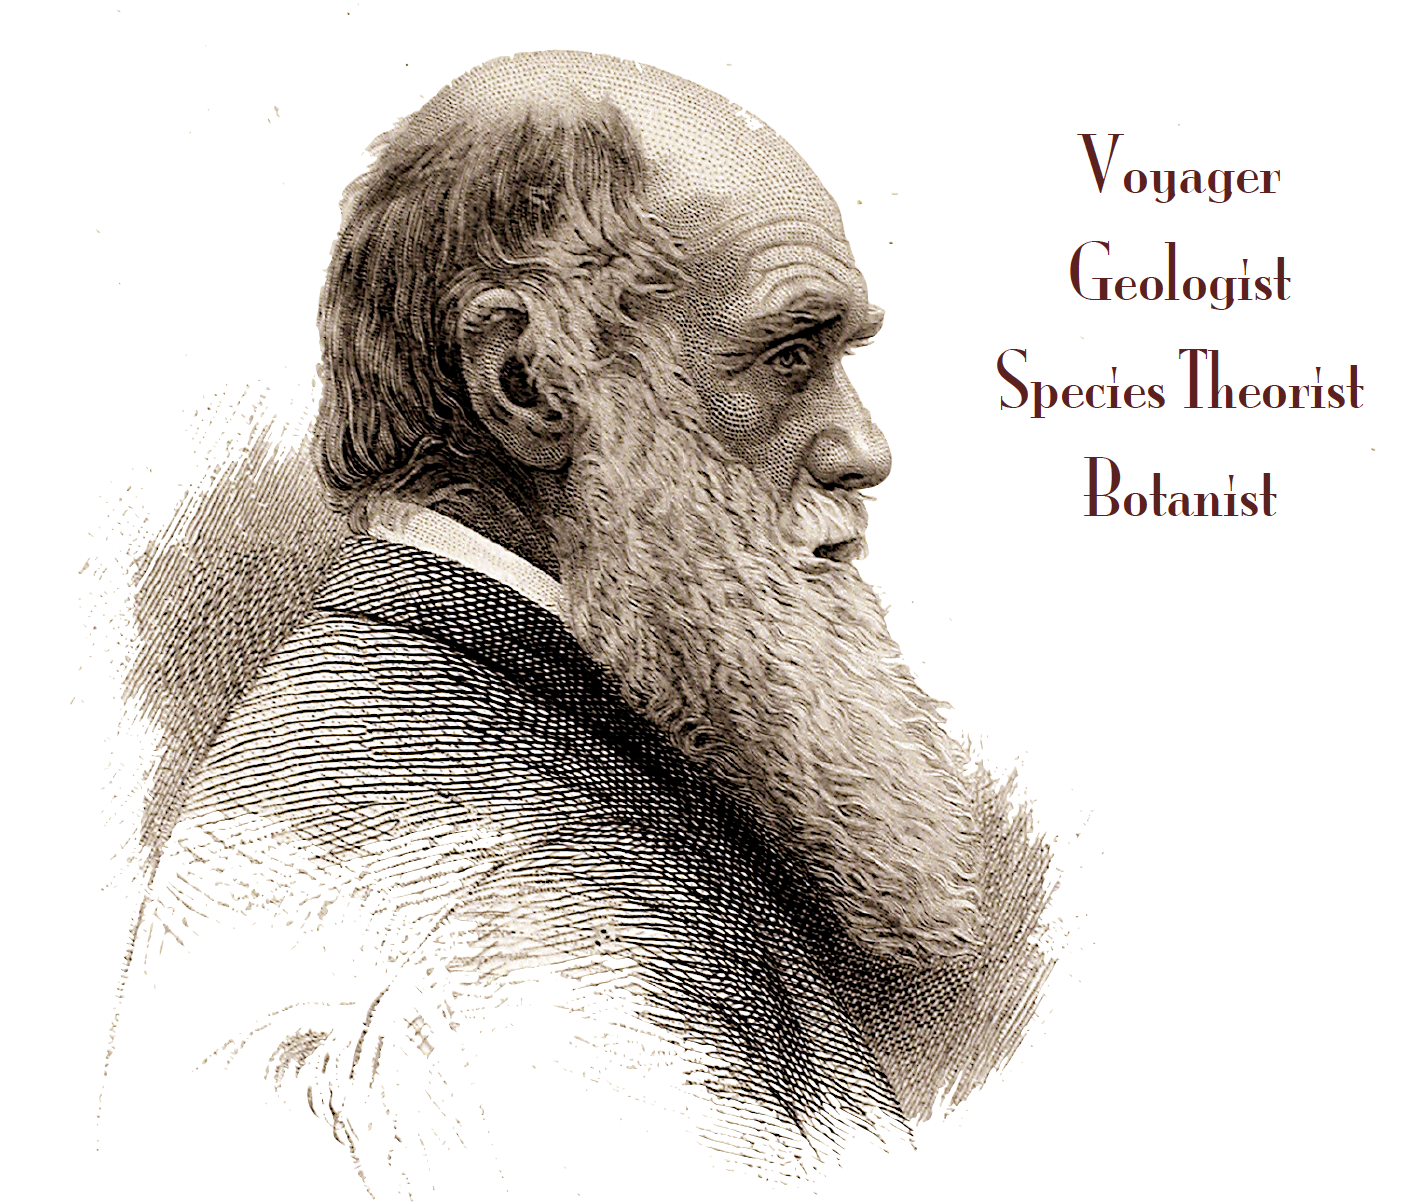 Image of Darwin from Exhibition brochure